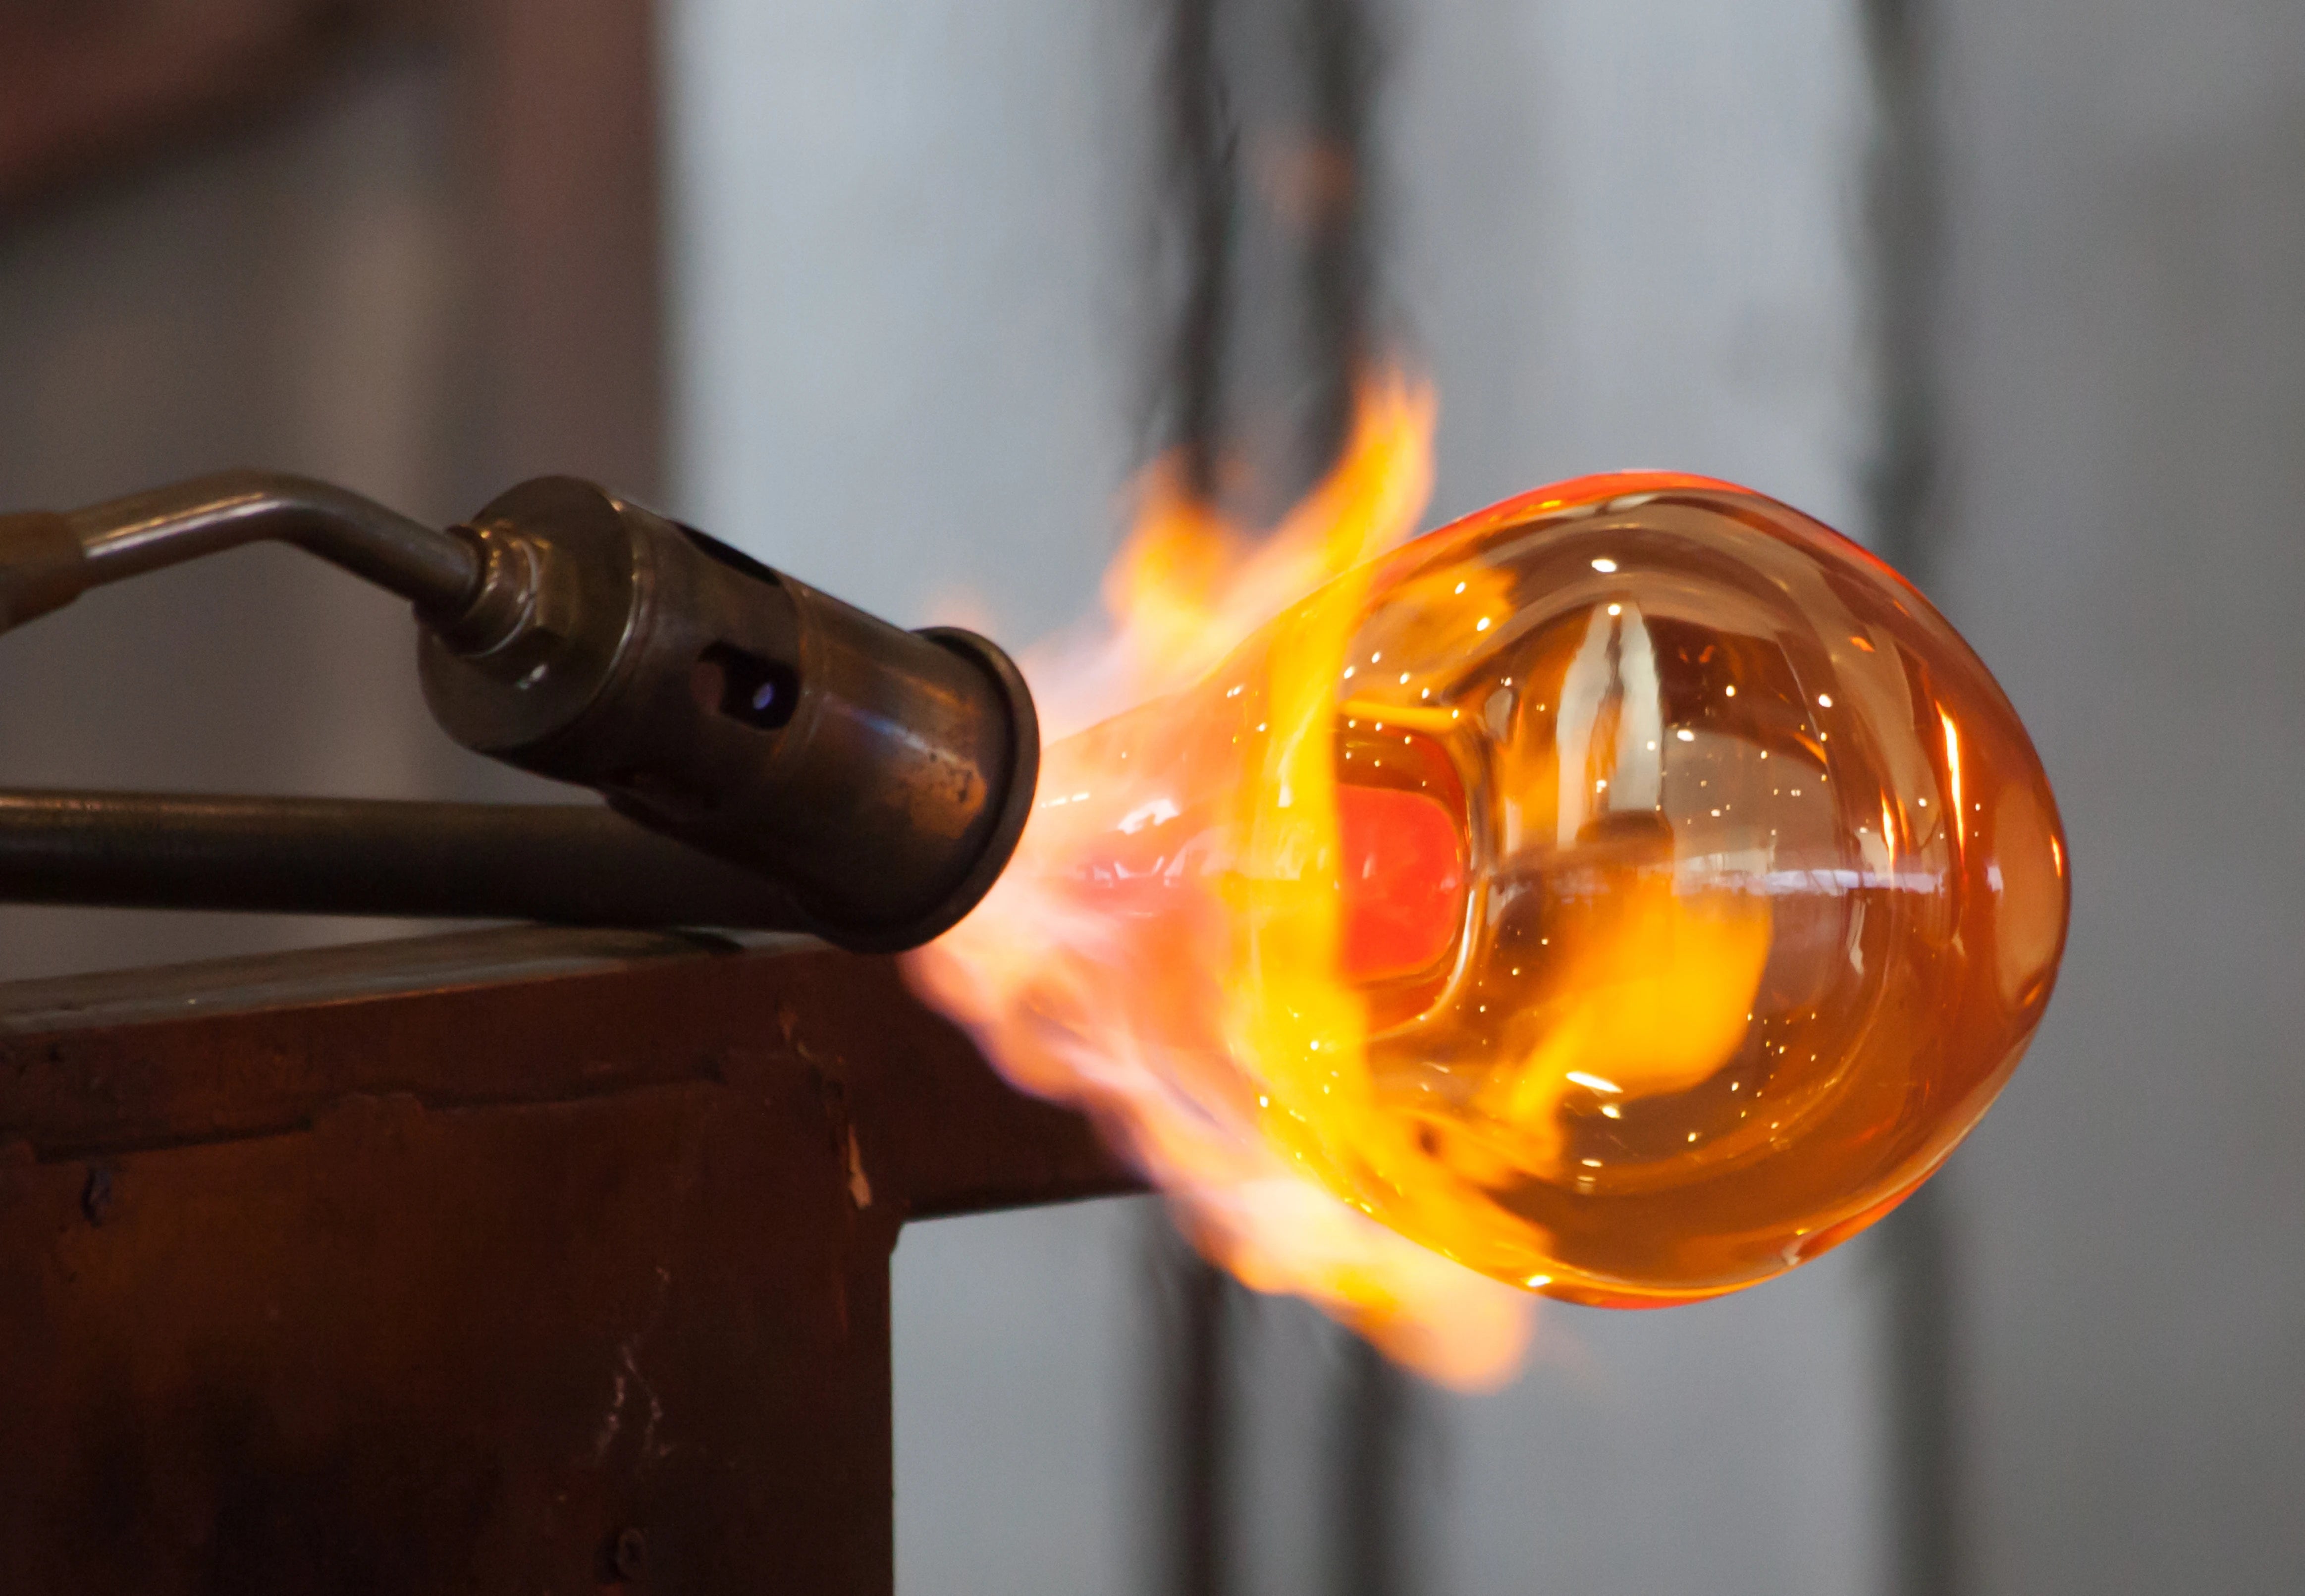 A glass blower is making a glass ball.